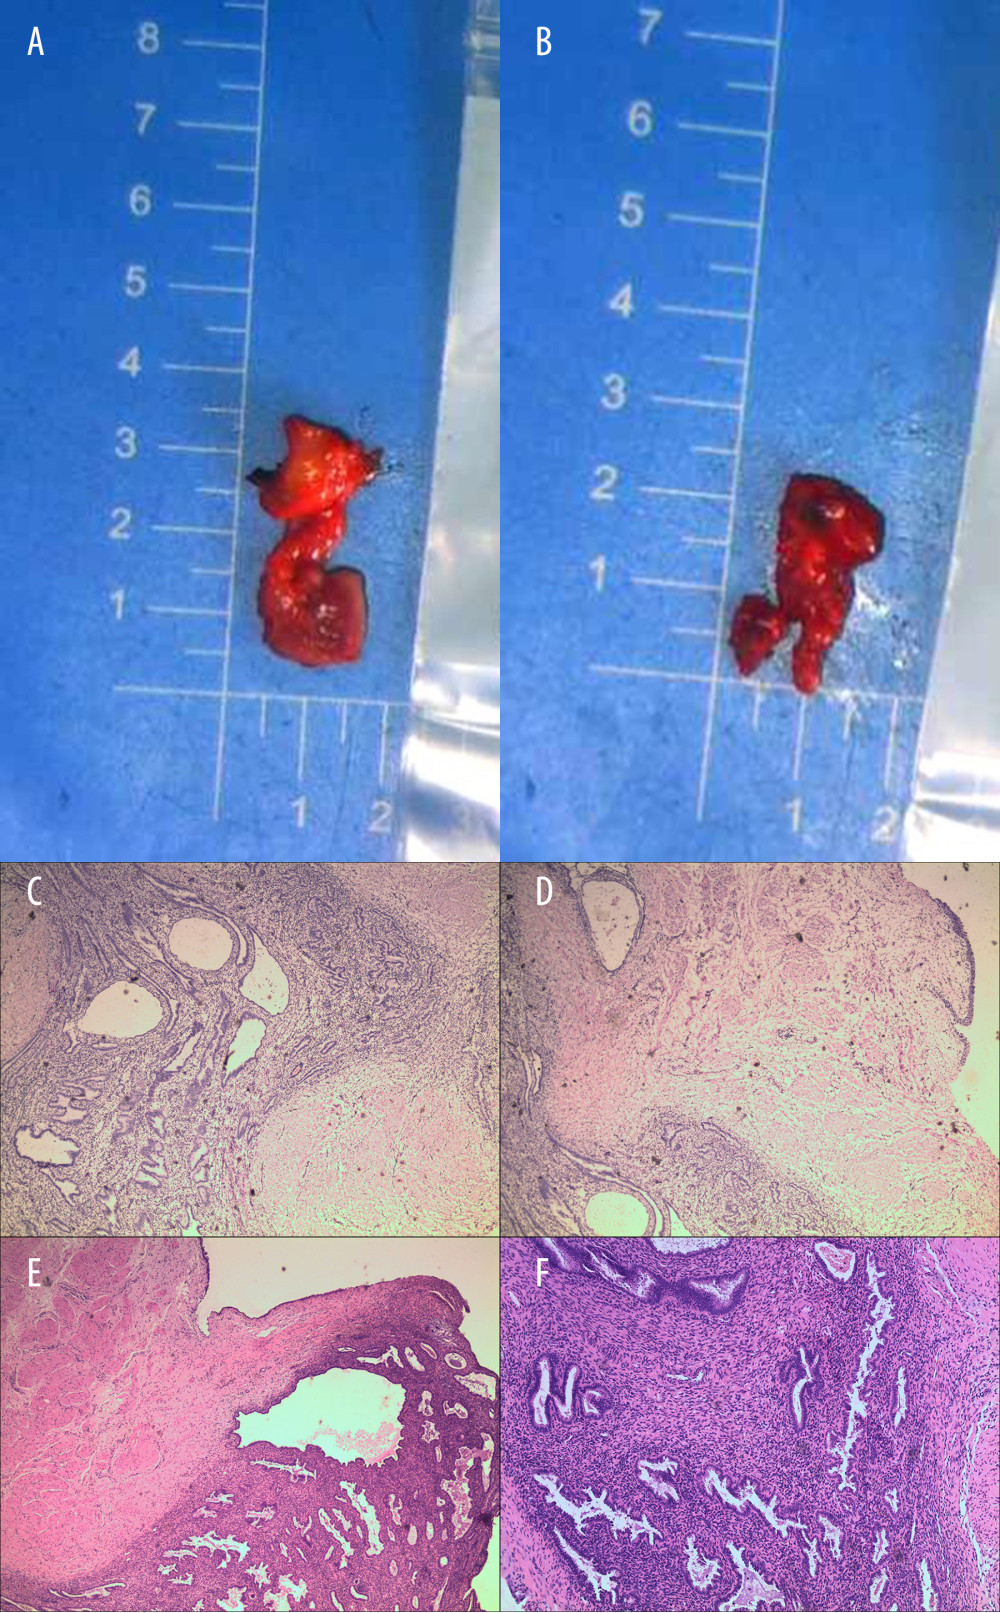 Pictures of surgically removed tissue and pathological pictures of the tissue. (A) Right mid-section stricture ureter; (B) Resection of the surrounding tissue of the ureter; (C, D) Intraoperative quick freezing pathological images, endometrial tissue can be seen in normal ureteral tissue. (E, F) 40× and 100× paraffin section images showing focal endometriosis.